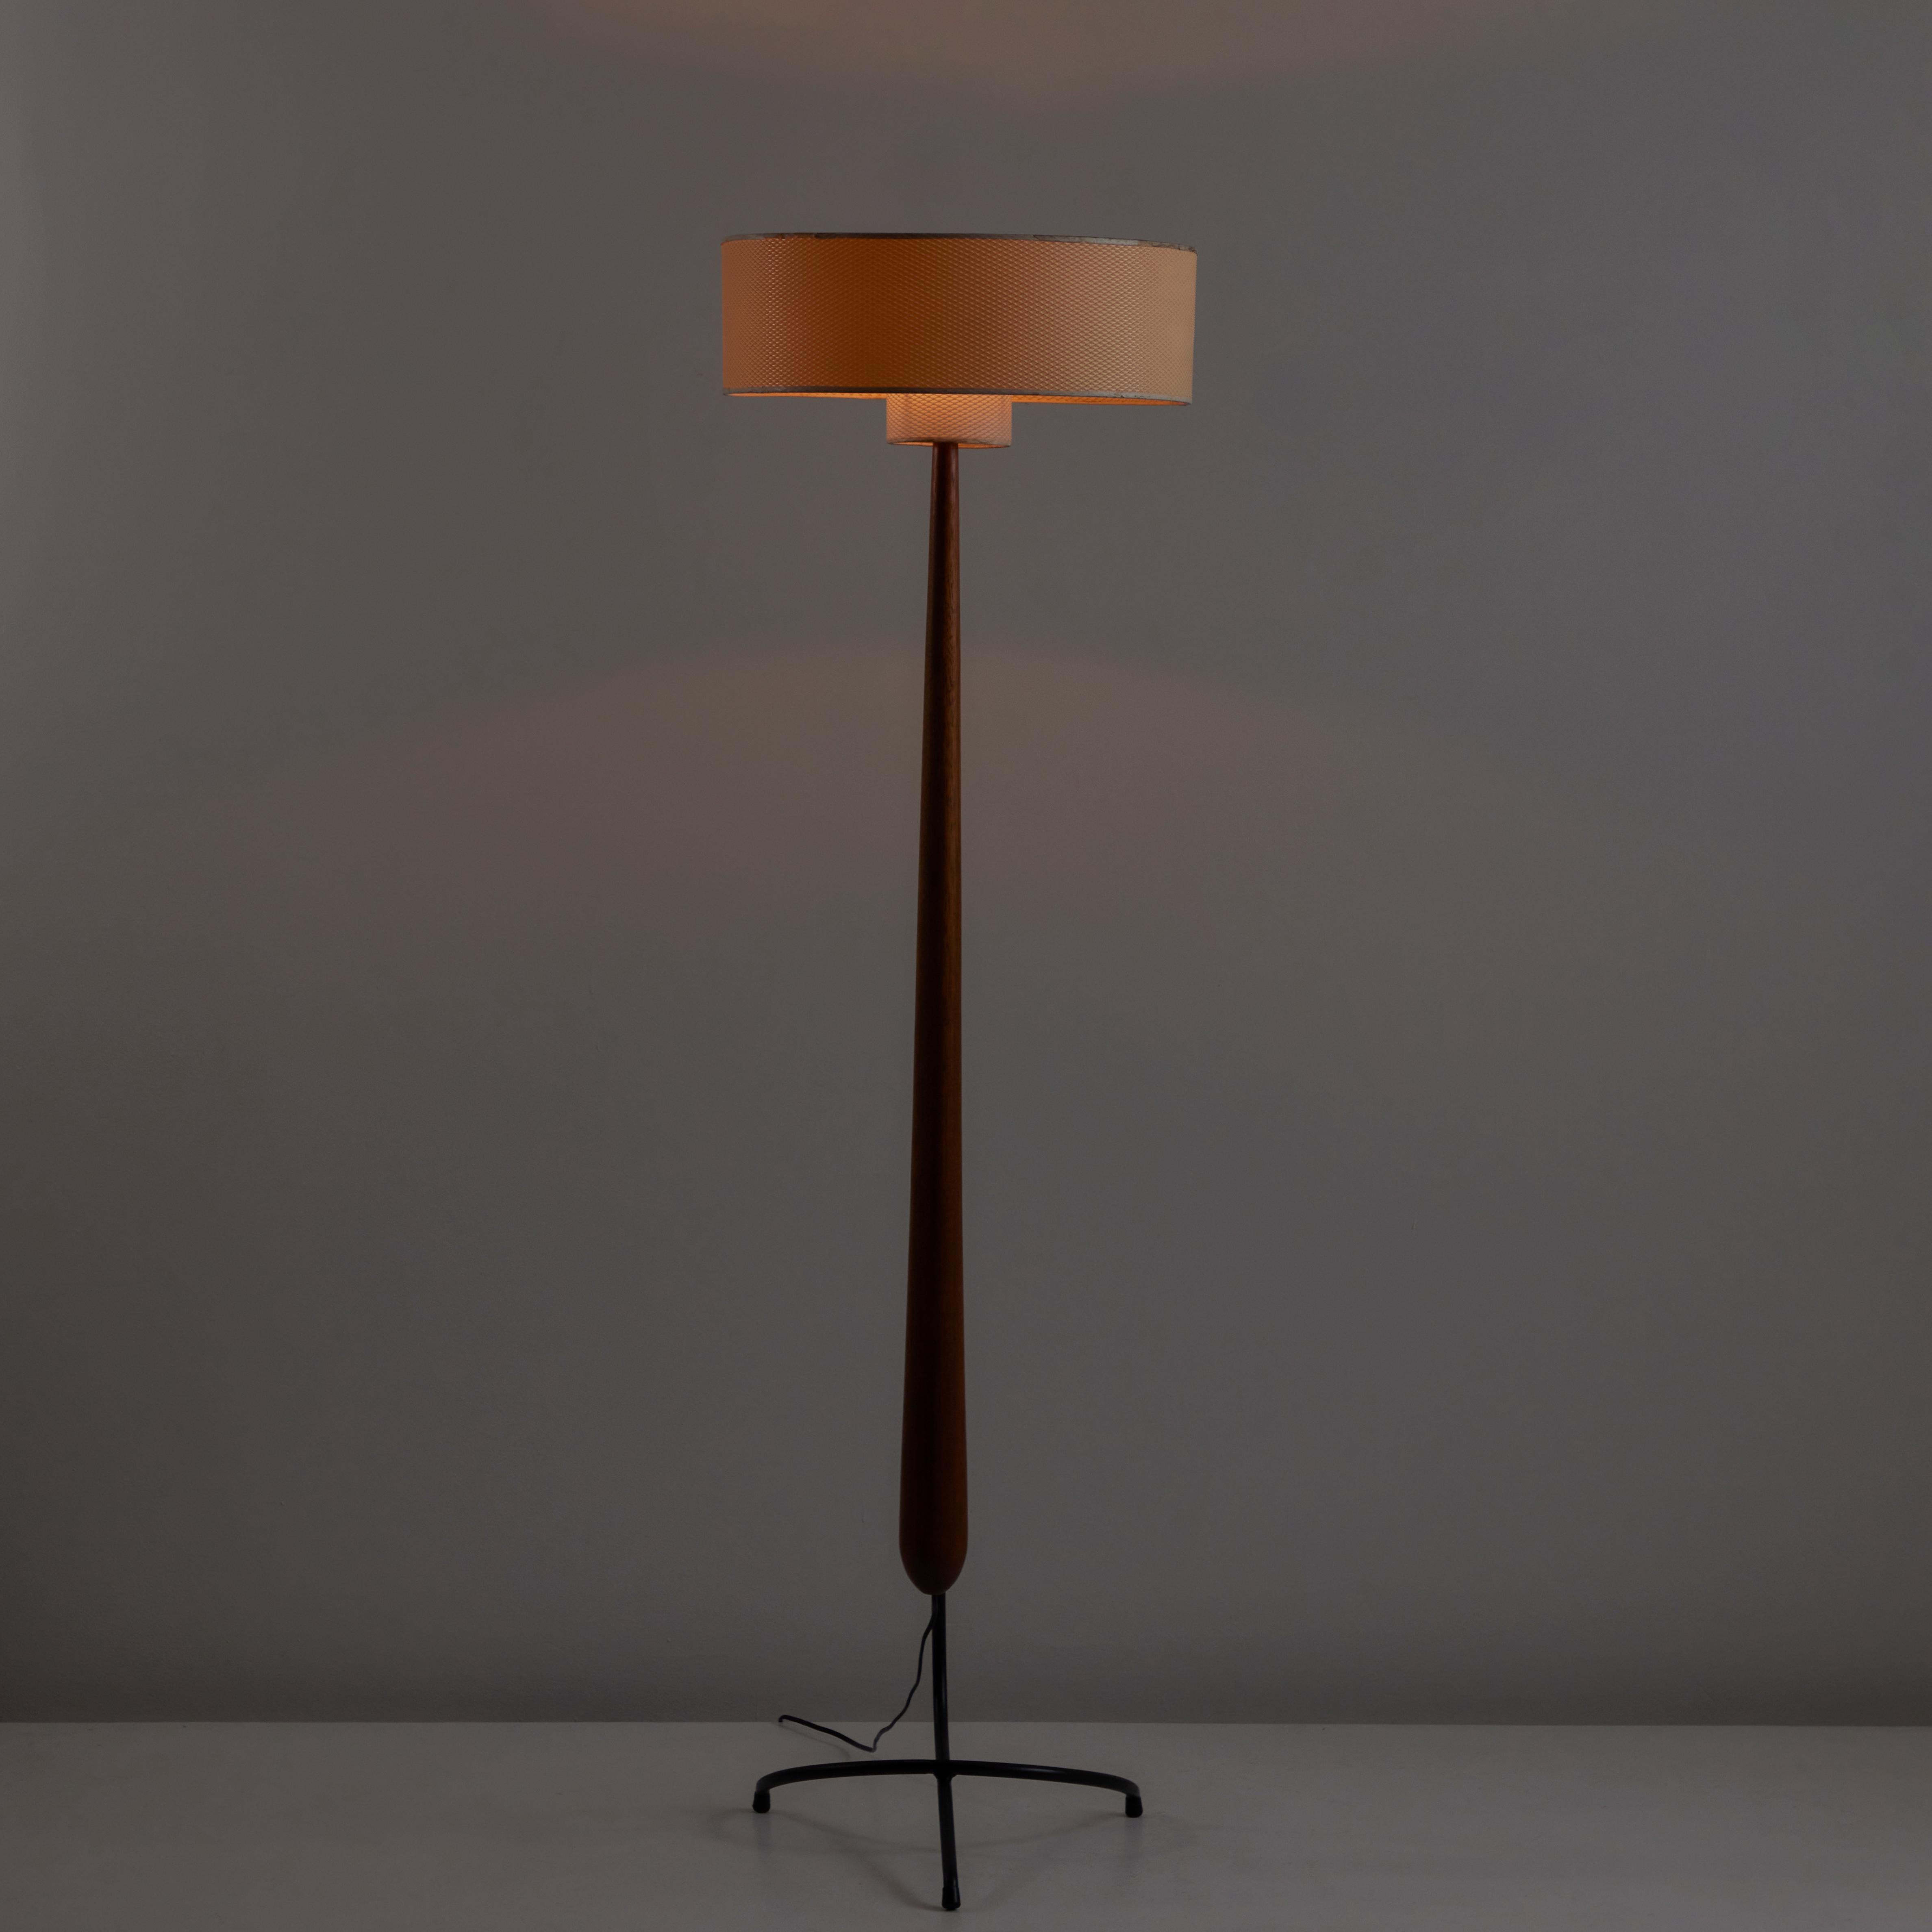 Rare Model 14.958 Floor Lamp by Rispal. Designed and manufactured in France, circa 1950s. Rare sculptural floor lamp with slender custom wood stem, interlocking curved steel base, and double layered textured parchment shade. The floor lamp holds one